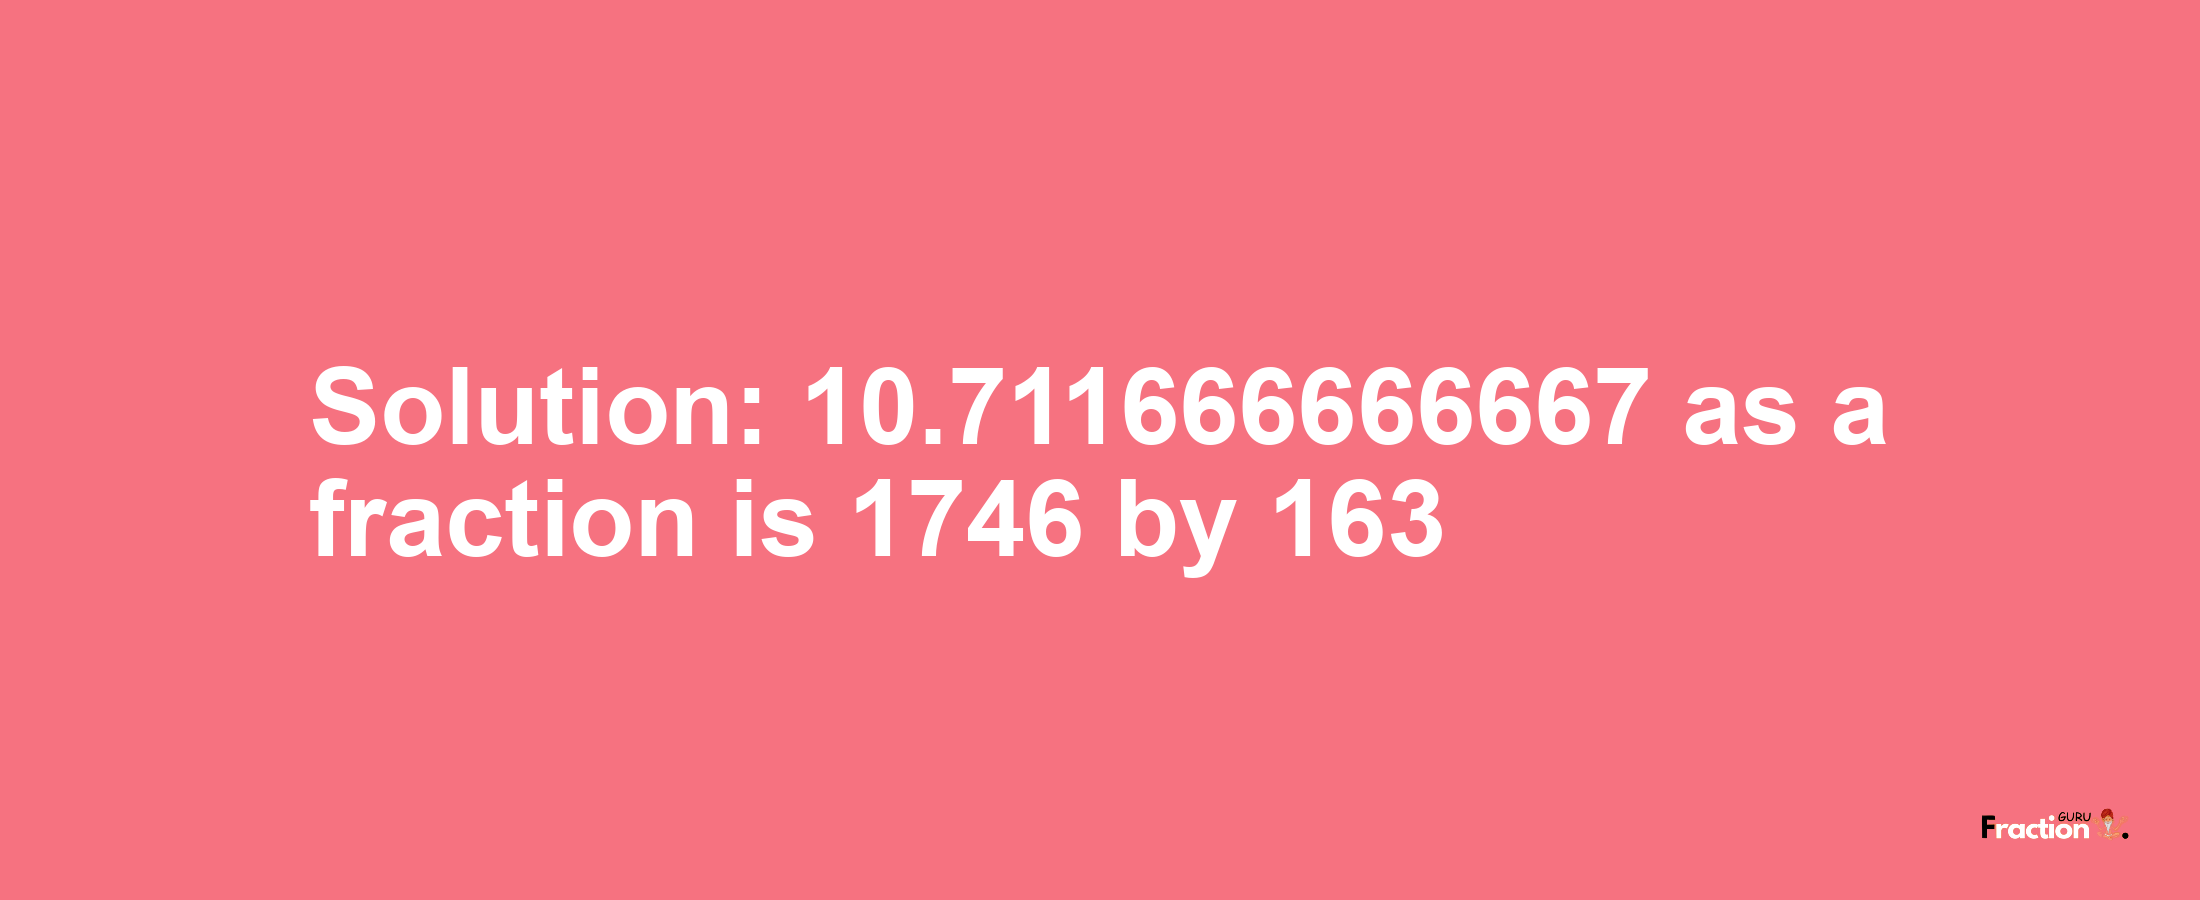 Solution:10.711666666667 as a fraction is 1746/163